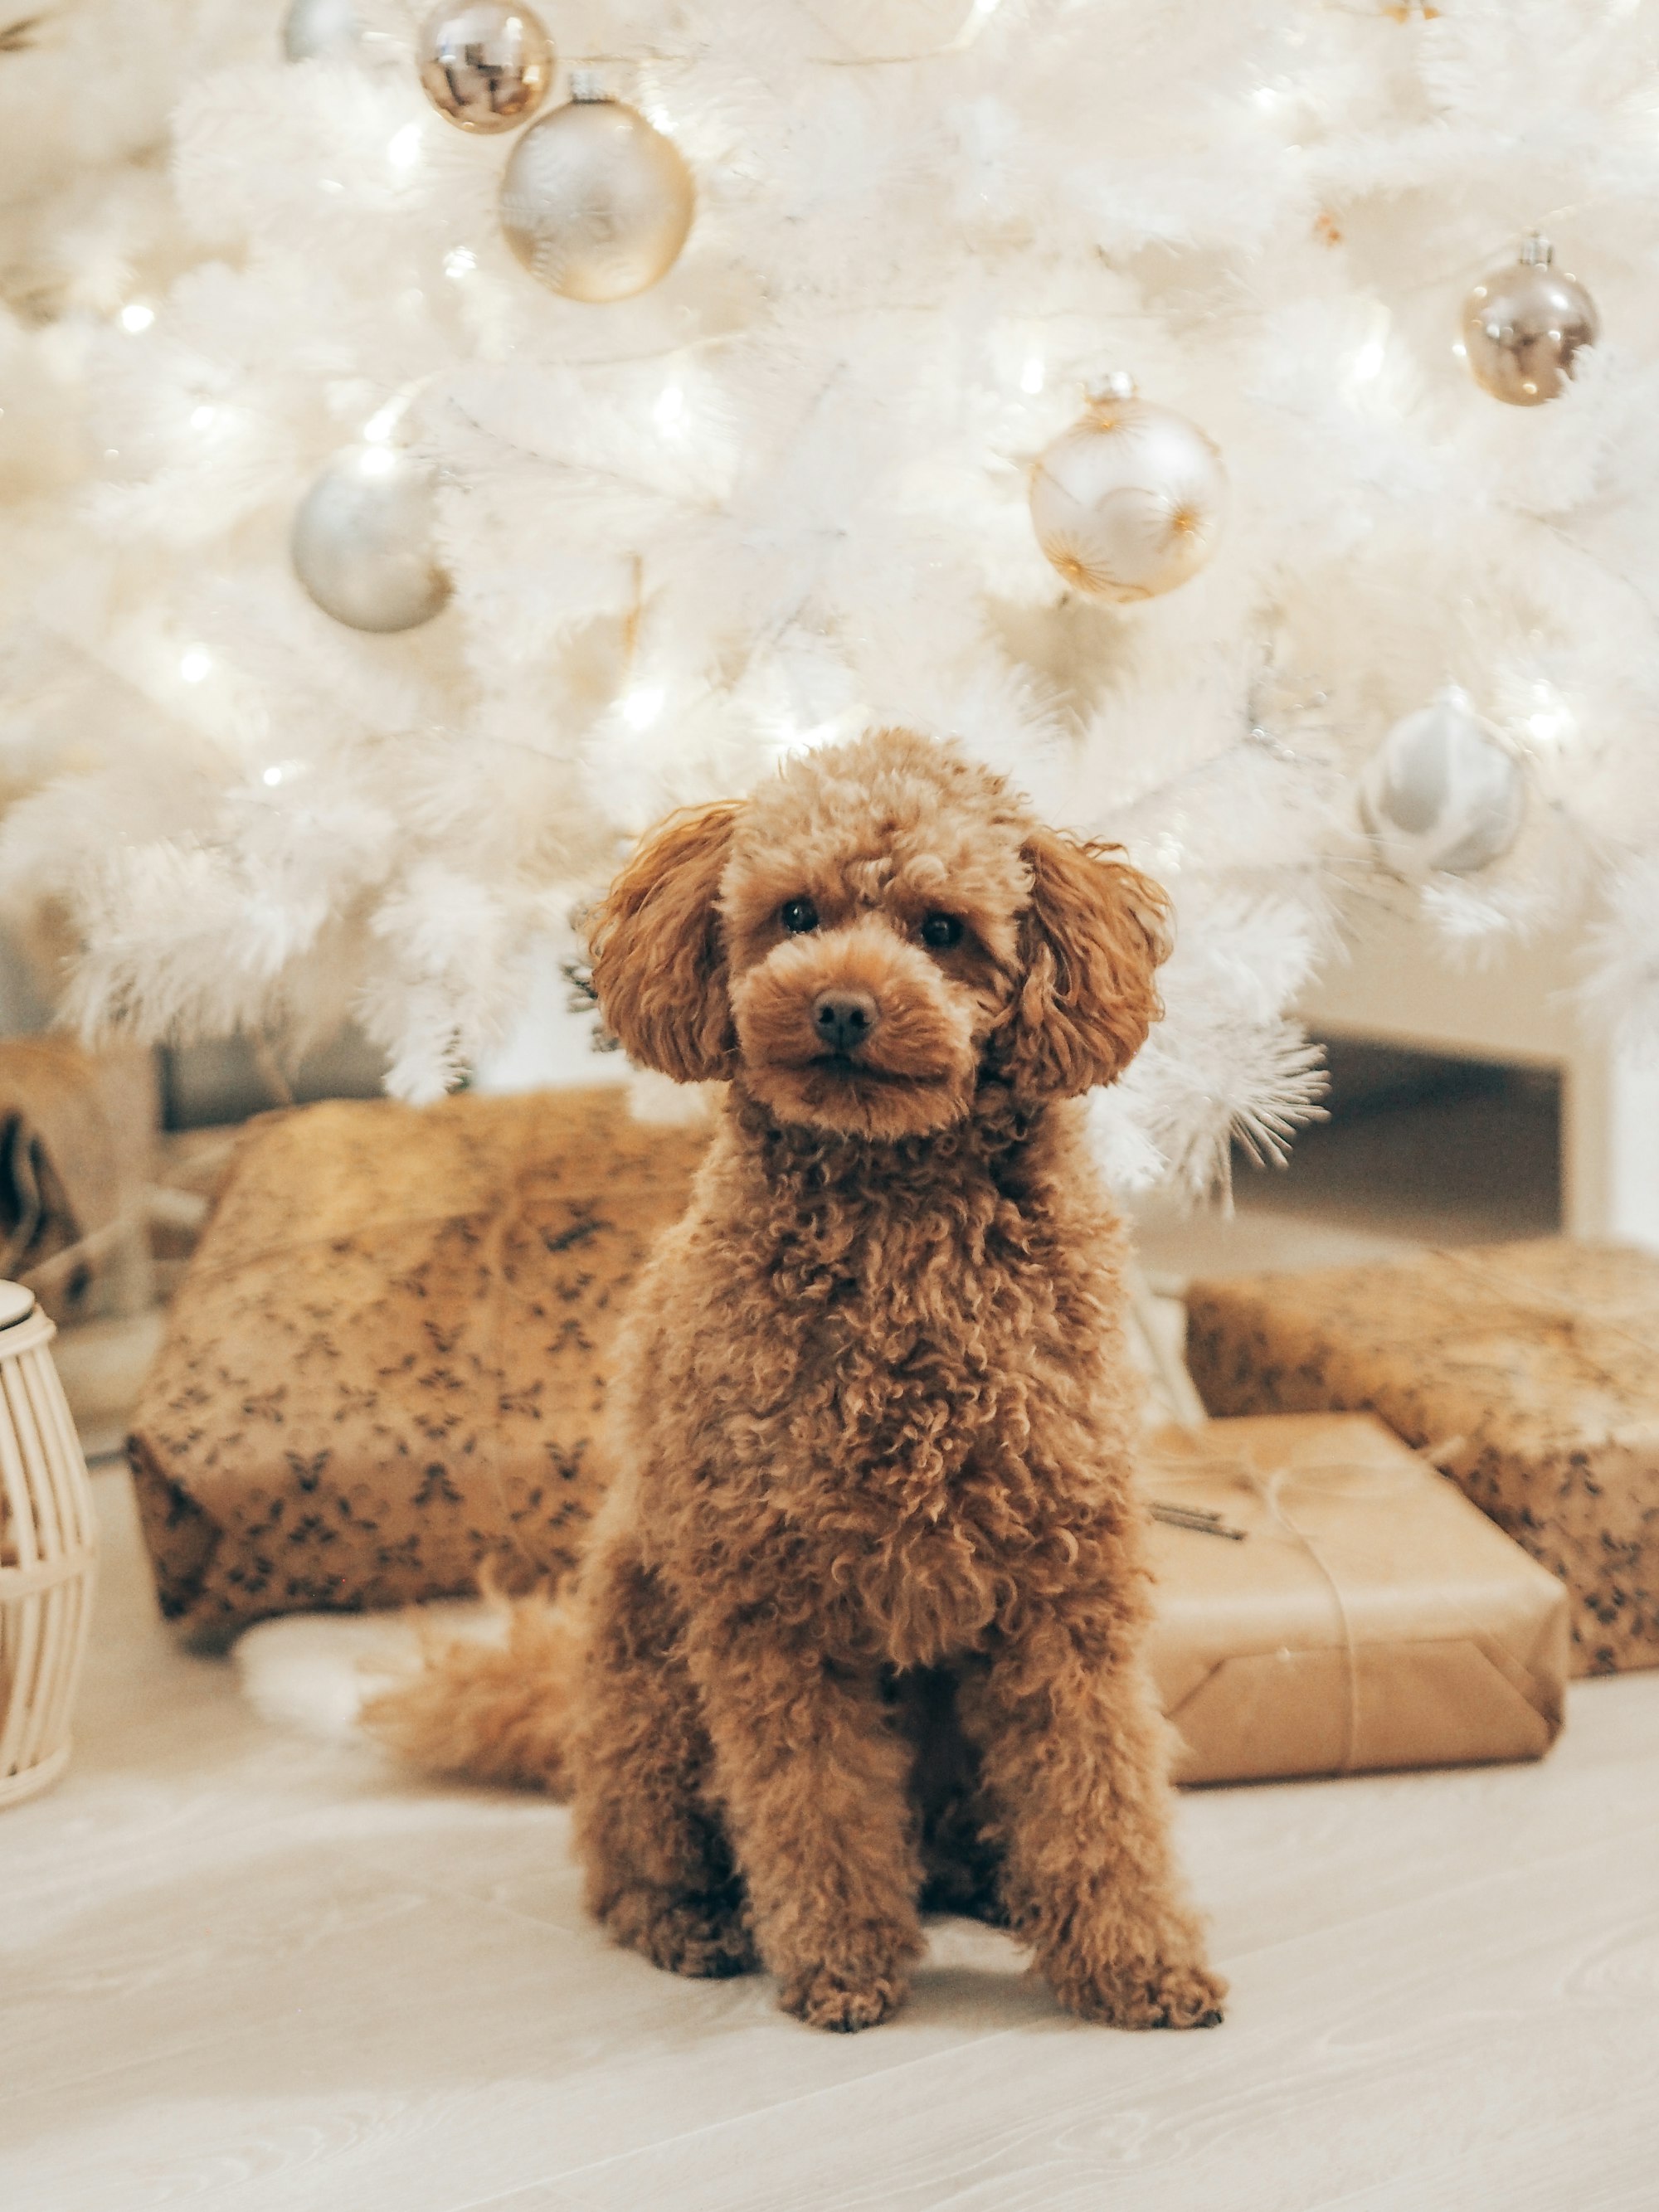 Miniature poodle in front of christmas gifts and tree